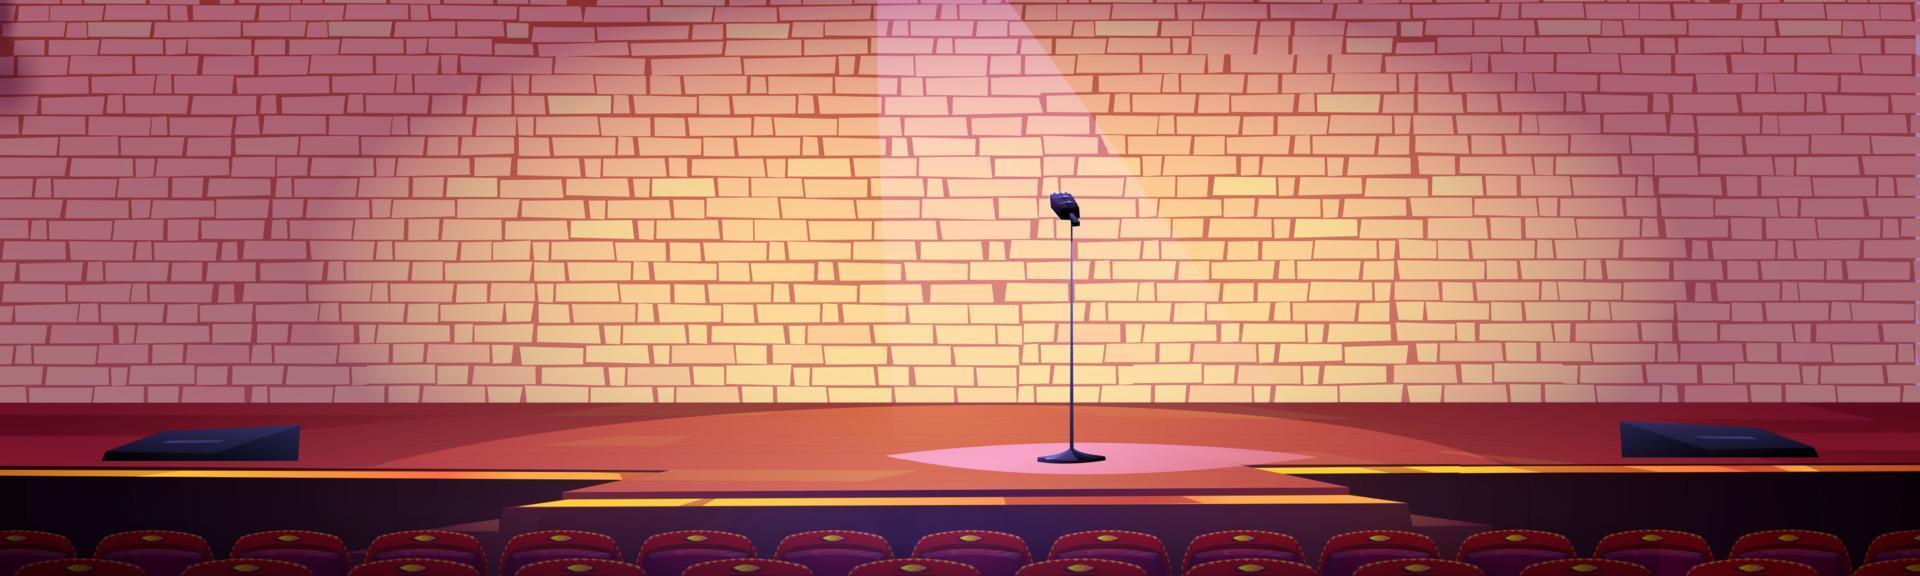 Stage for a show or entertainment with microphone vector